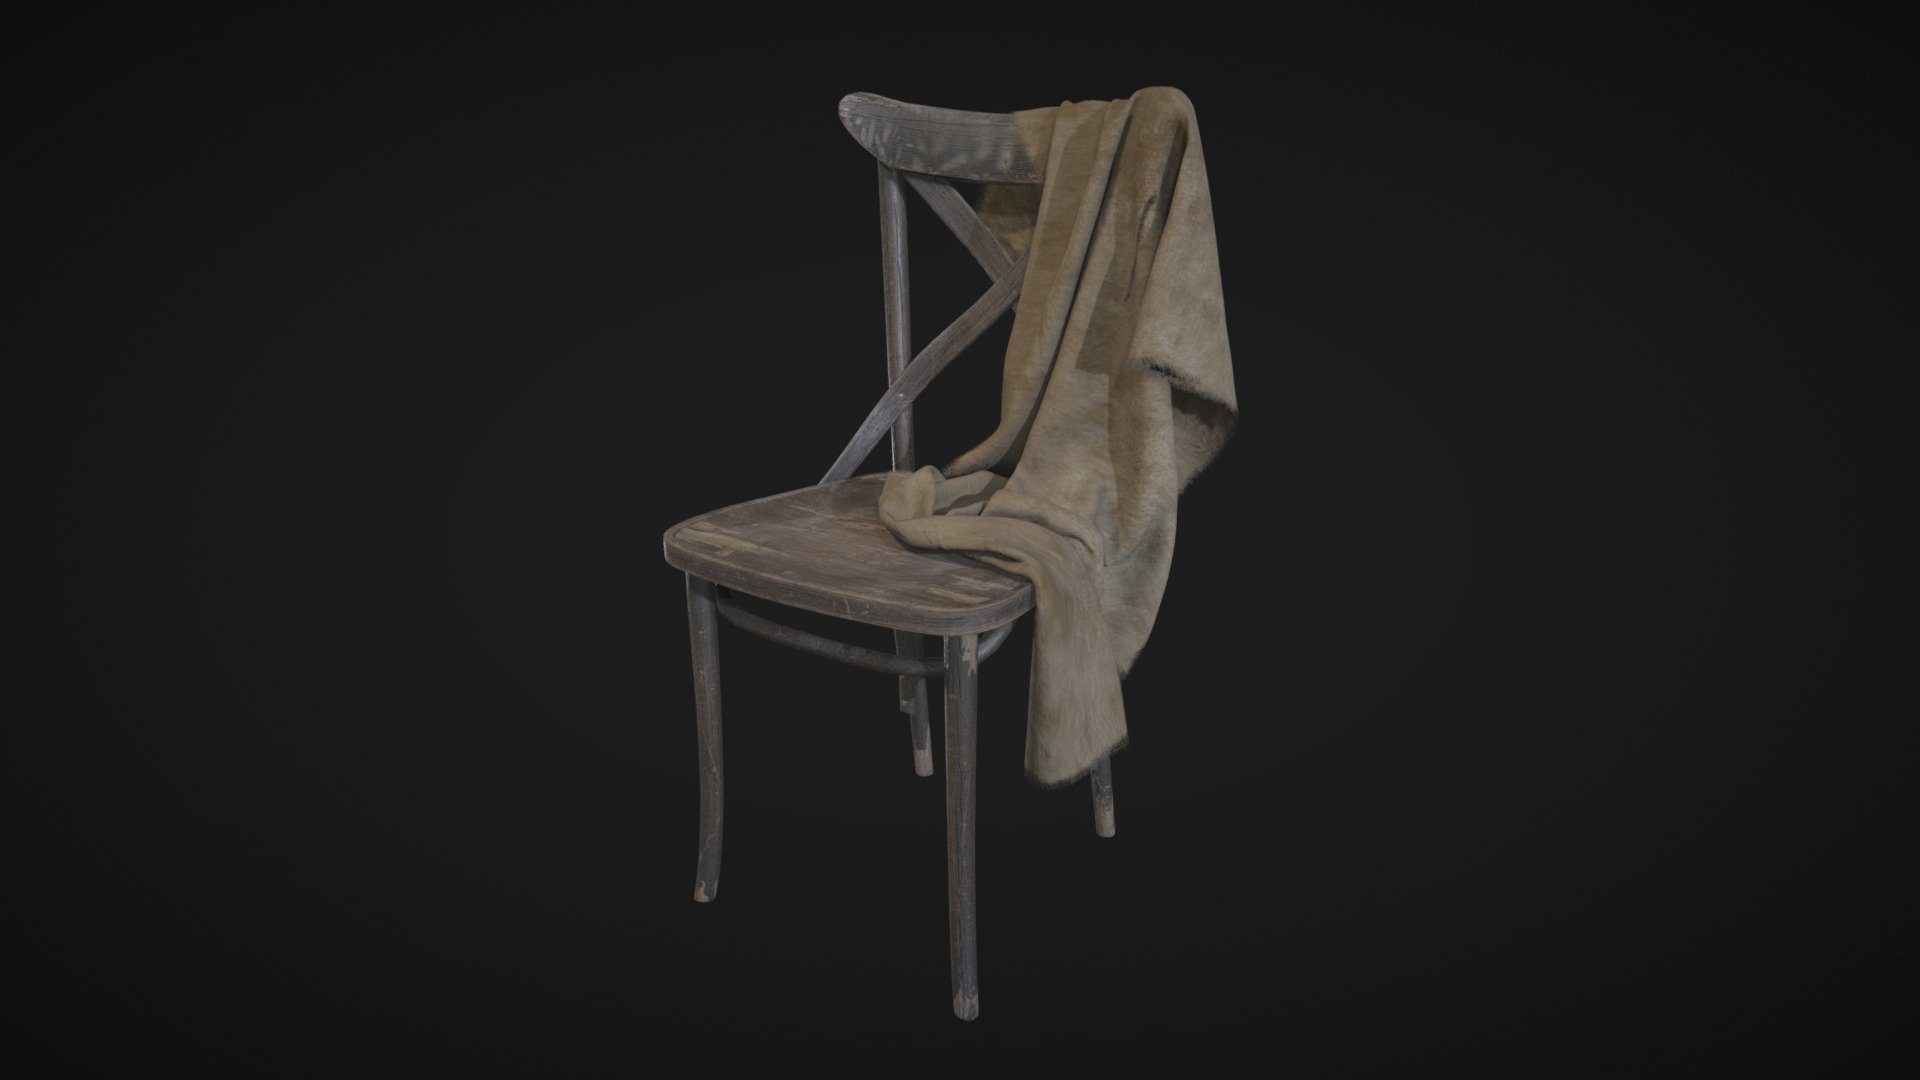 Practice piece, was exploring how many wonderful things Substance Painter can do to a model.
Used 2 sets of 4k textures. 
Software: 3Ds Max, RizomUV, Marvelous Designer, Zbrush, Substance Painter and Marmoset Toolbag
Really enjoyed the process, it was a lot of fun! - Old Chair - 3D model by Yana G (@yana.gengr) 3d model